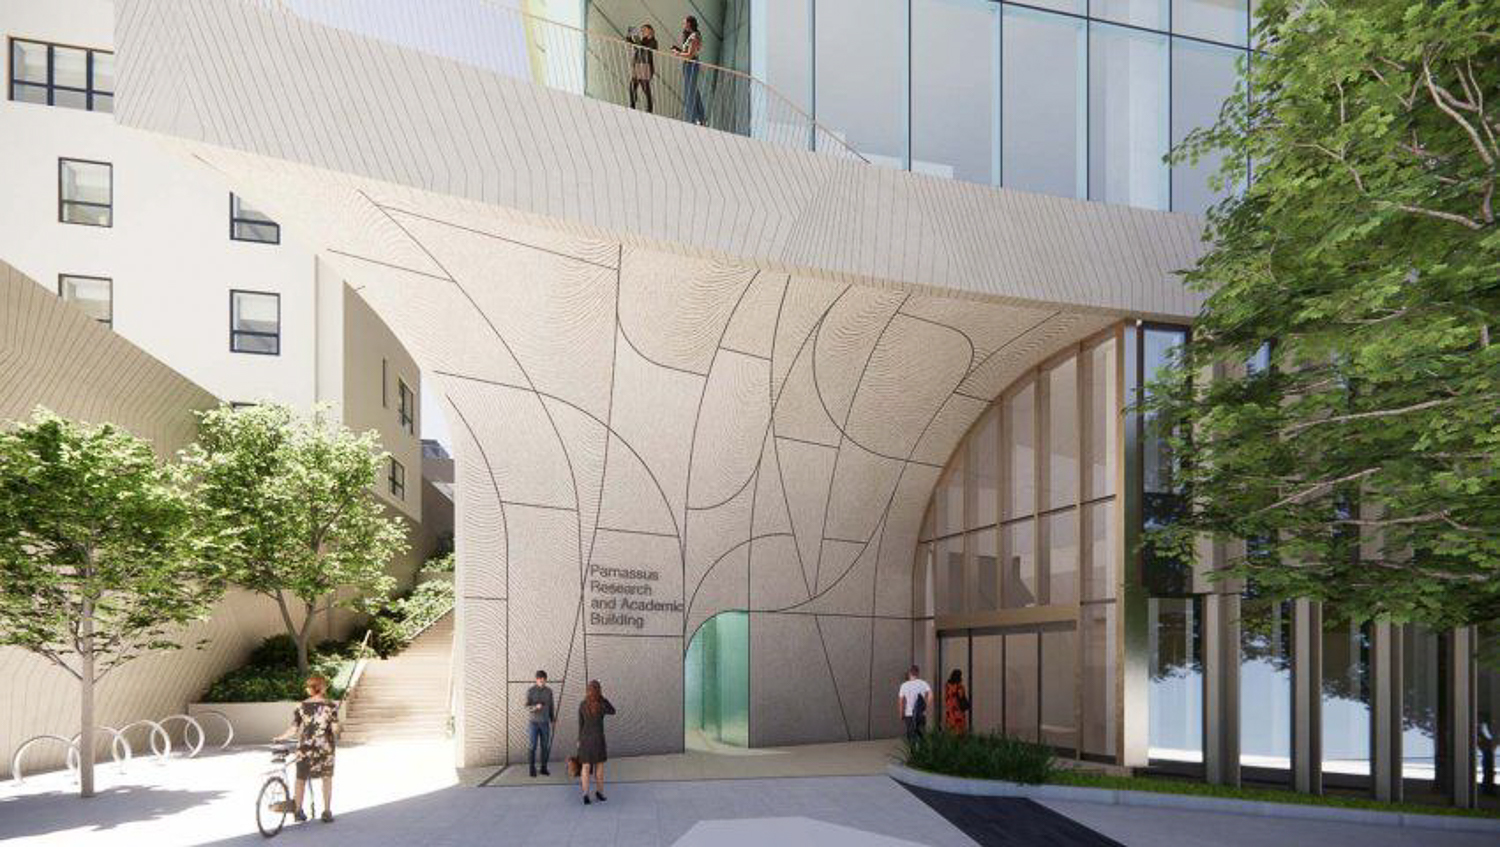 Parnassus Research and Academic Building entrance, rendering by Snøhetta